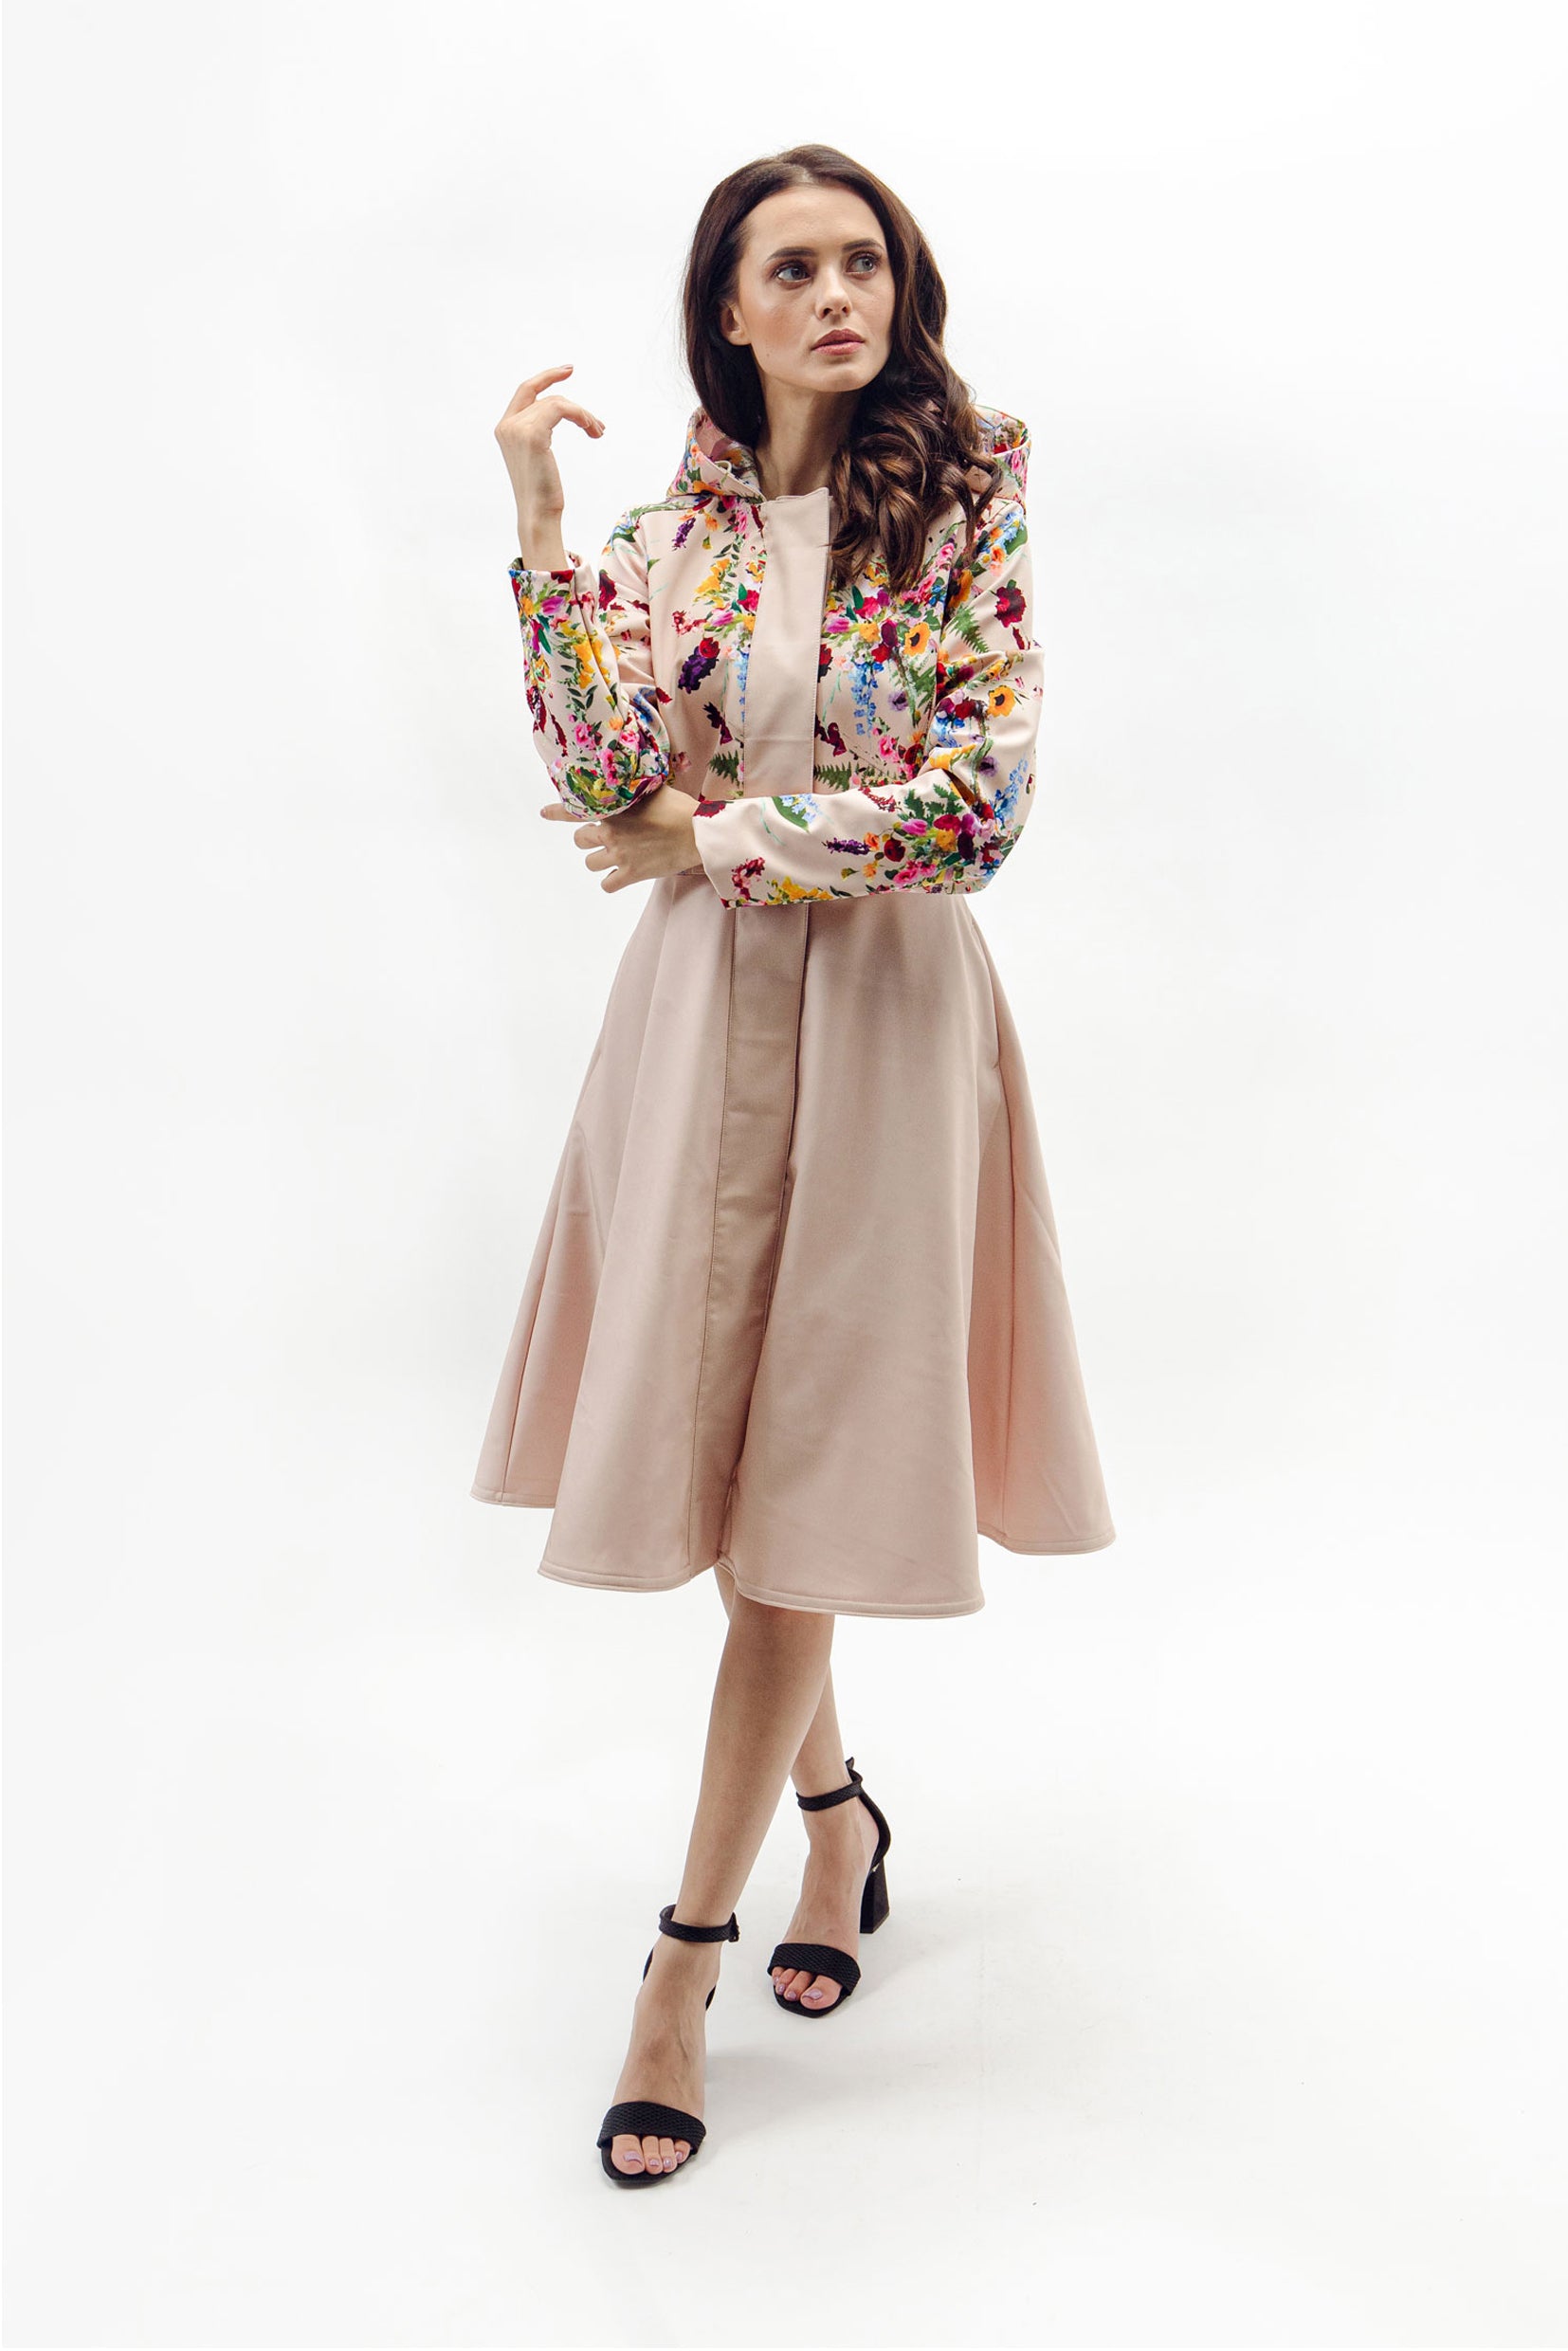 Waterproof Dress Coat for Women with floral print on top